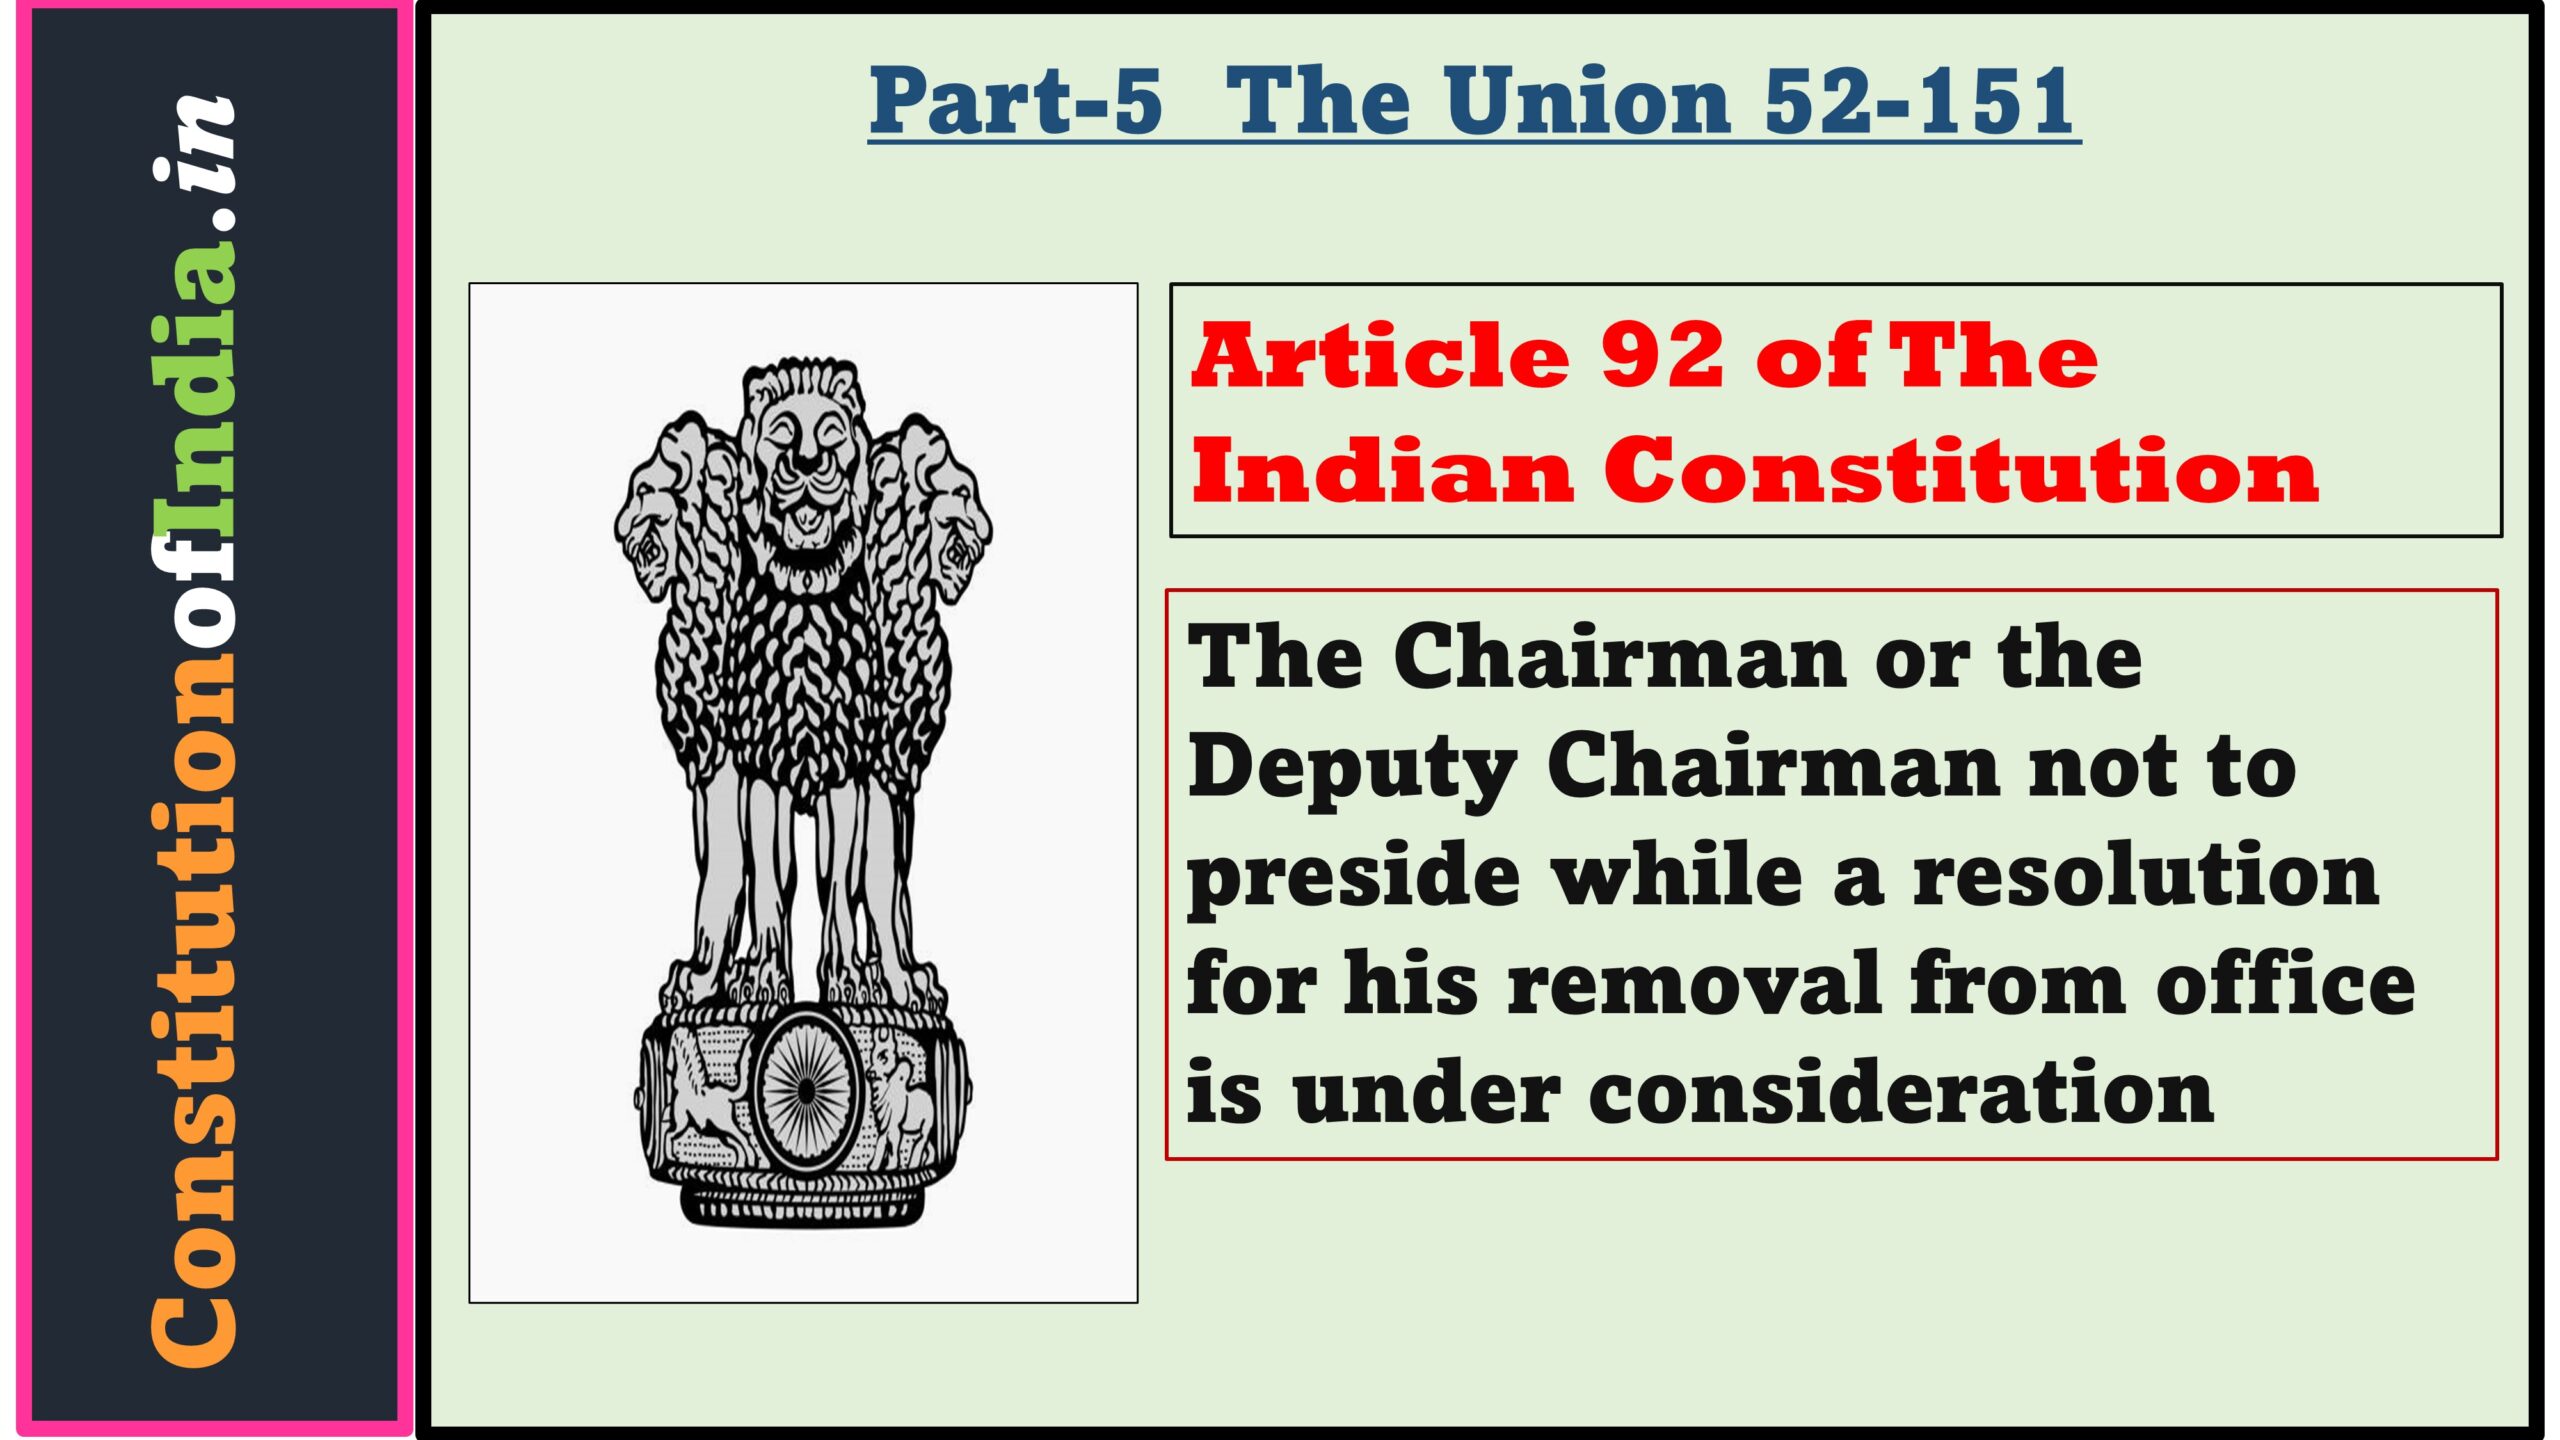 Article 92 of The Indian Constitution